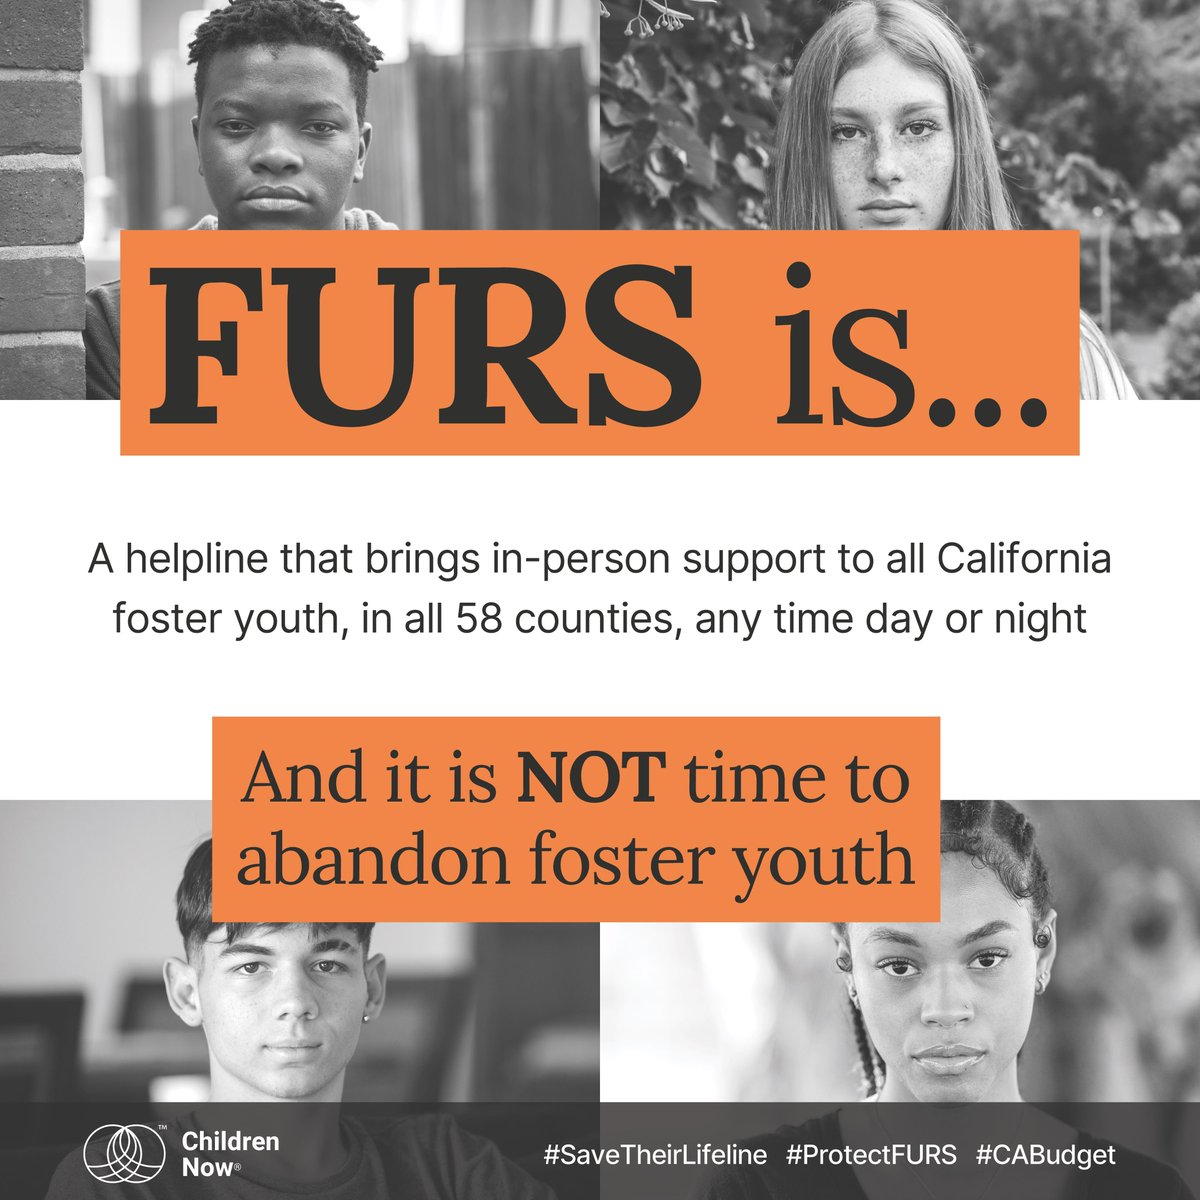 Foster youth need your help. Please join over 5,400 organizations in The Children's Movement of California and sign on to our campaign to save FURS: bit.ly/48lMAo2